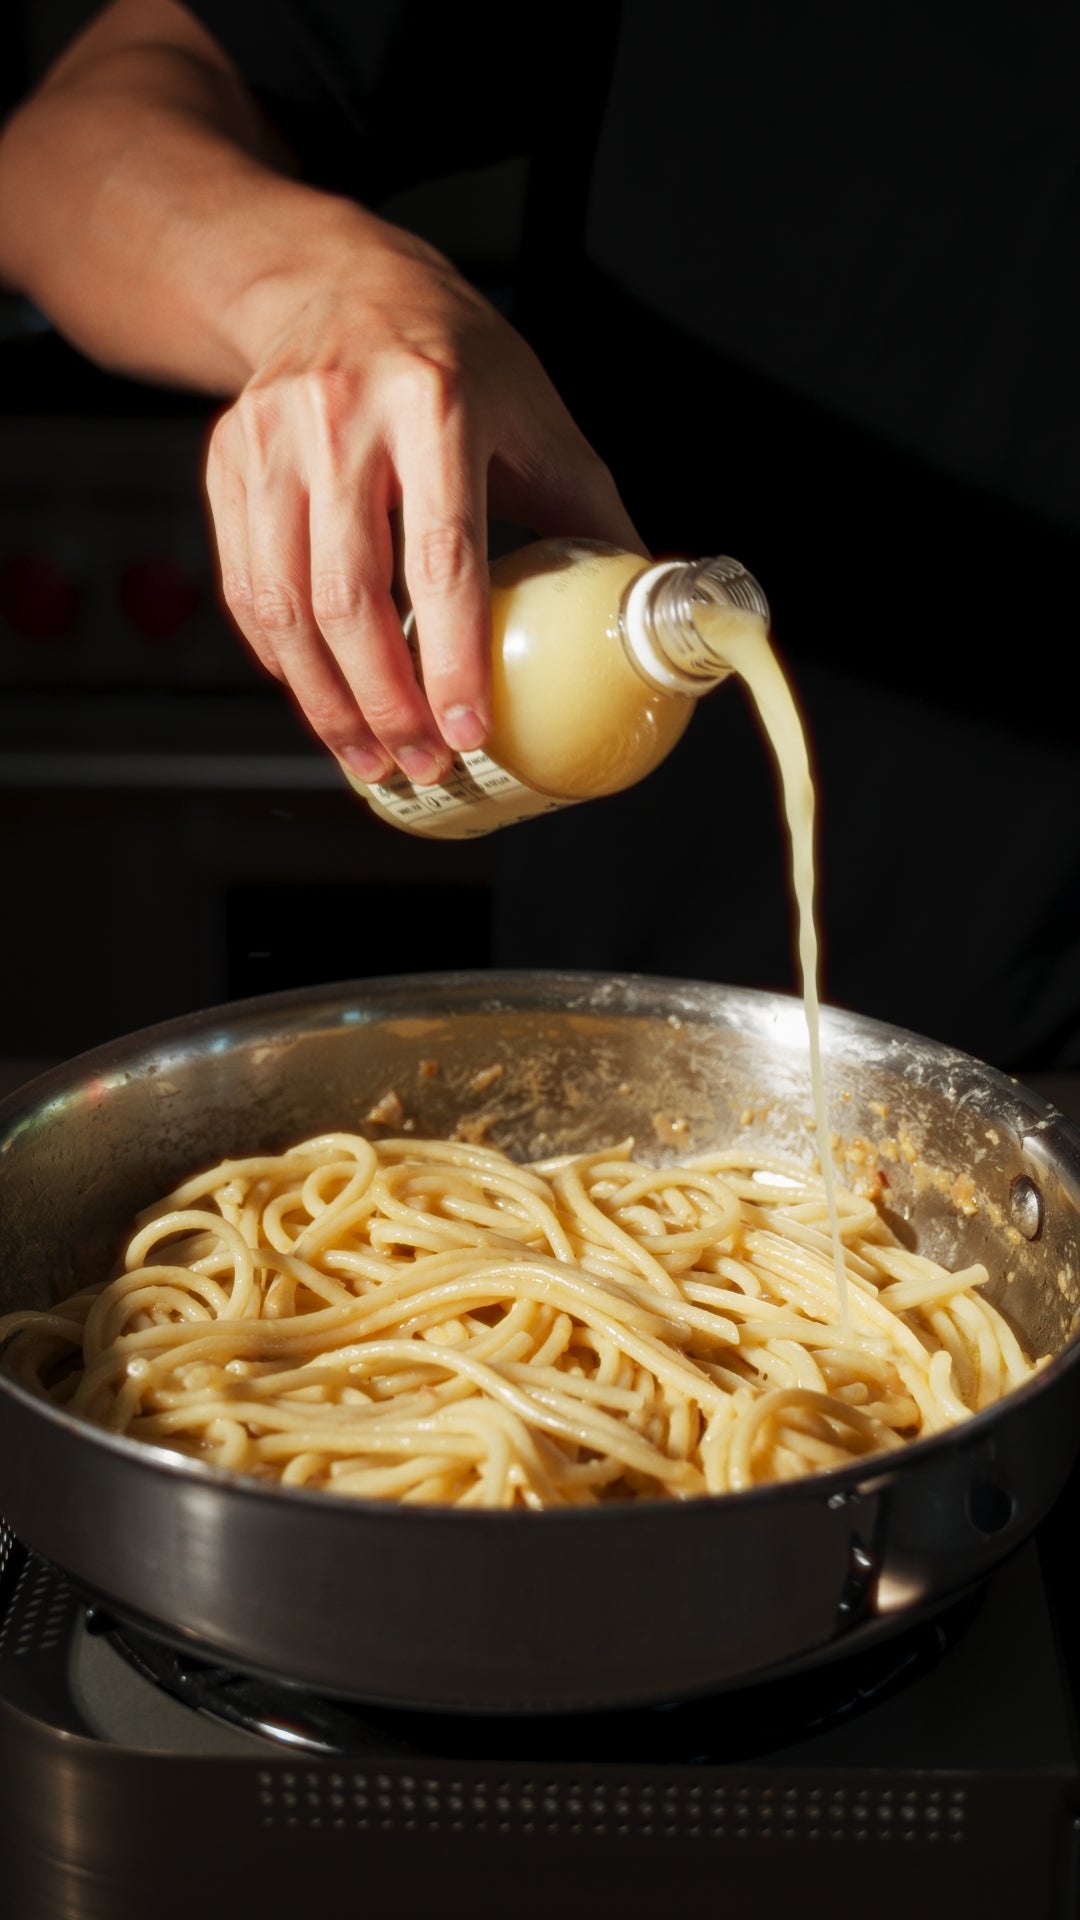 100% yuzu juice being poured into stainless steel pan with pasta front of a dark background